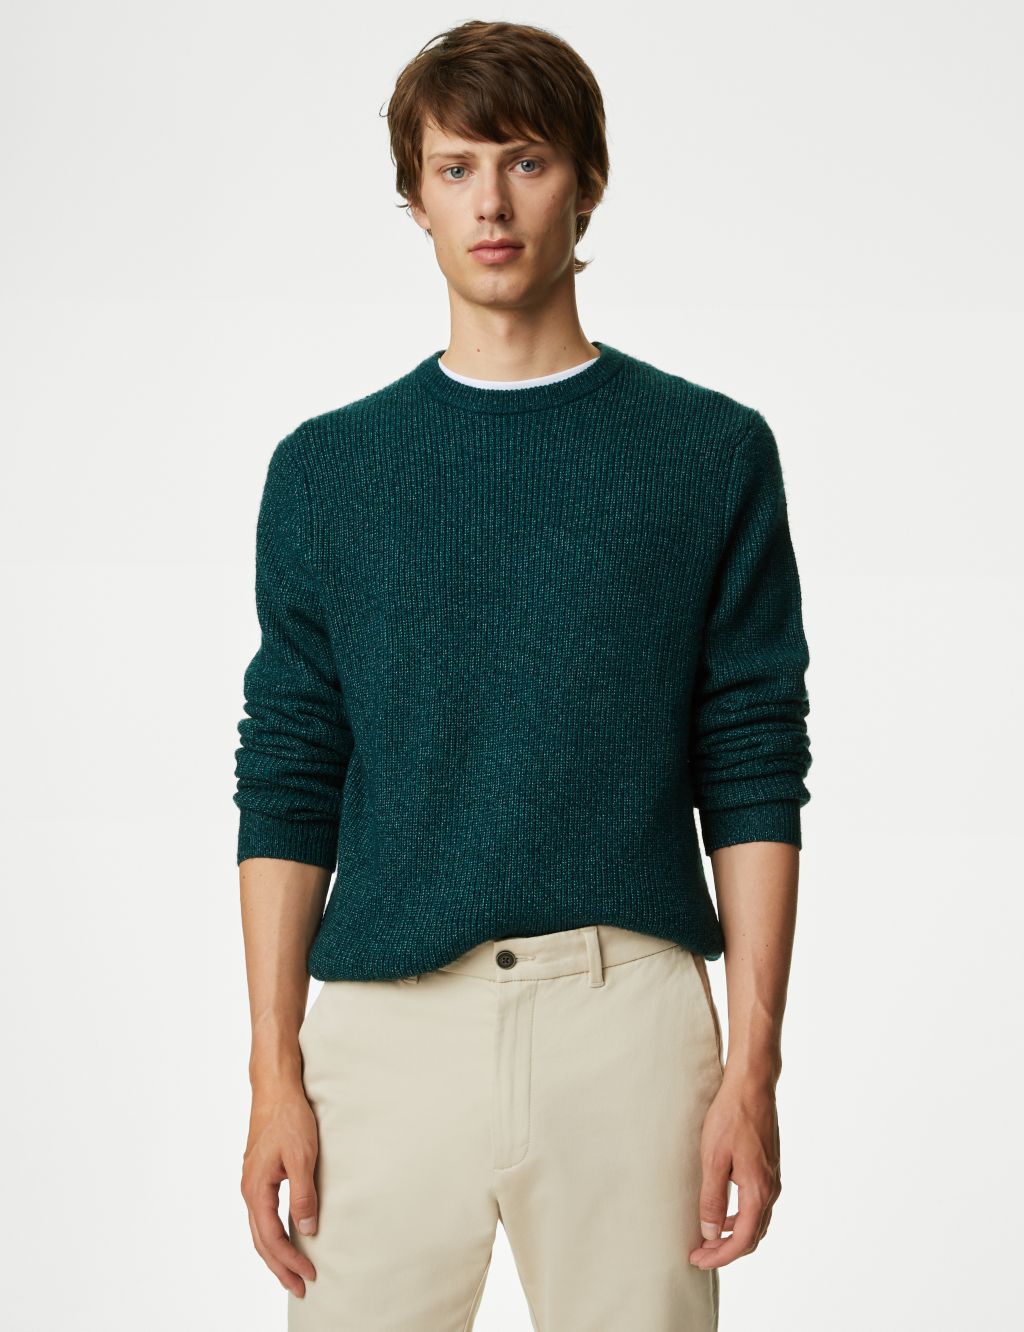 Men’s Green Jumpers | M&S